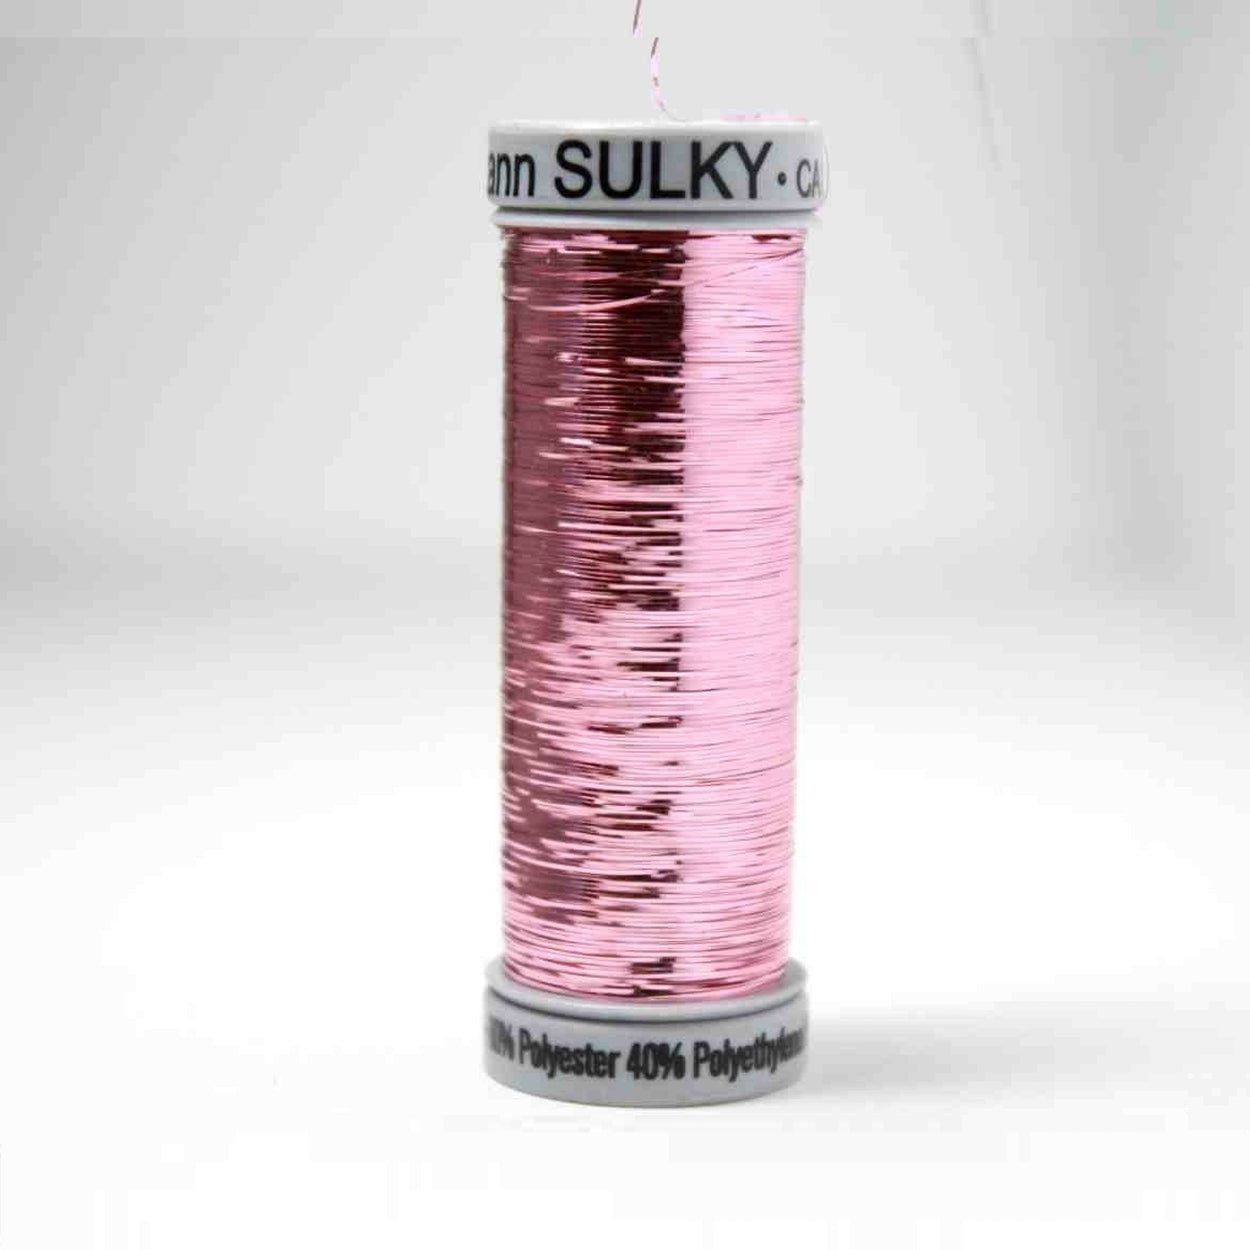 Sulky Sliver Metallic Embroidery Thread 8033 Light Pink from Jaycotts Sewing Supplies